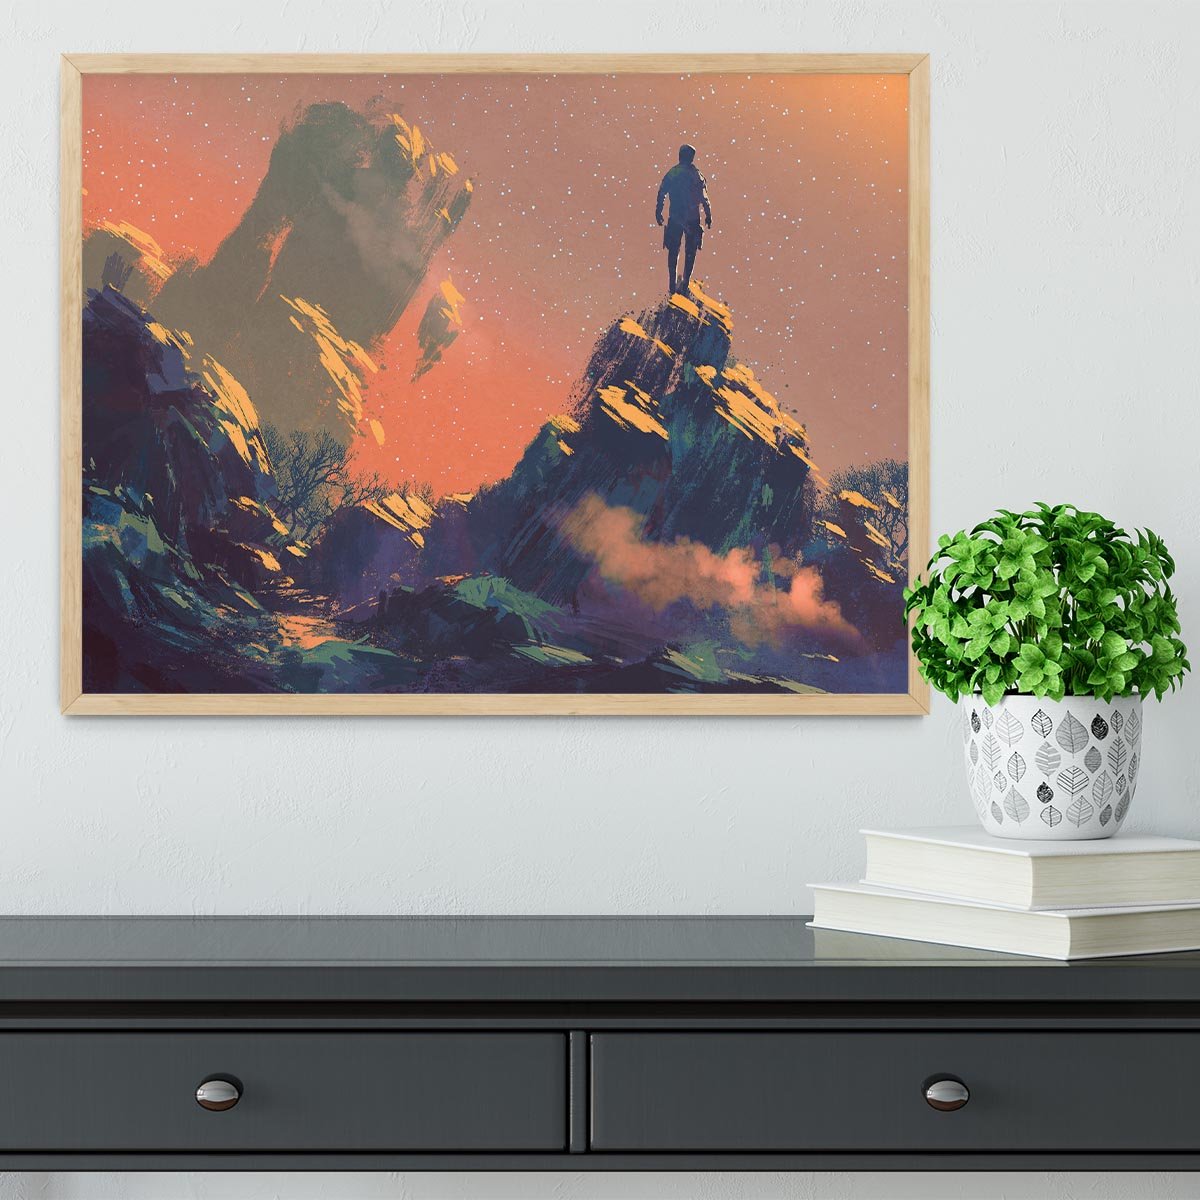 Top of the hill watching the stars Framed Print - Canvas Art Rocks - 4